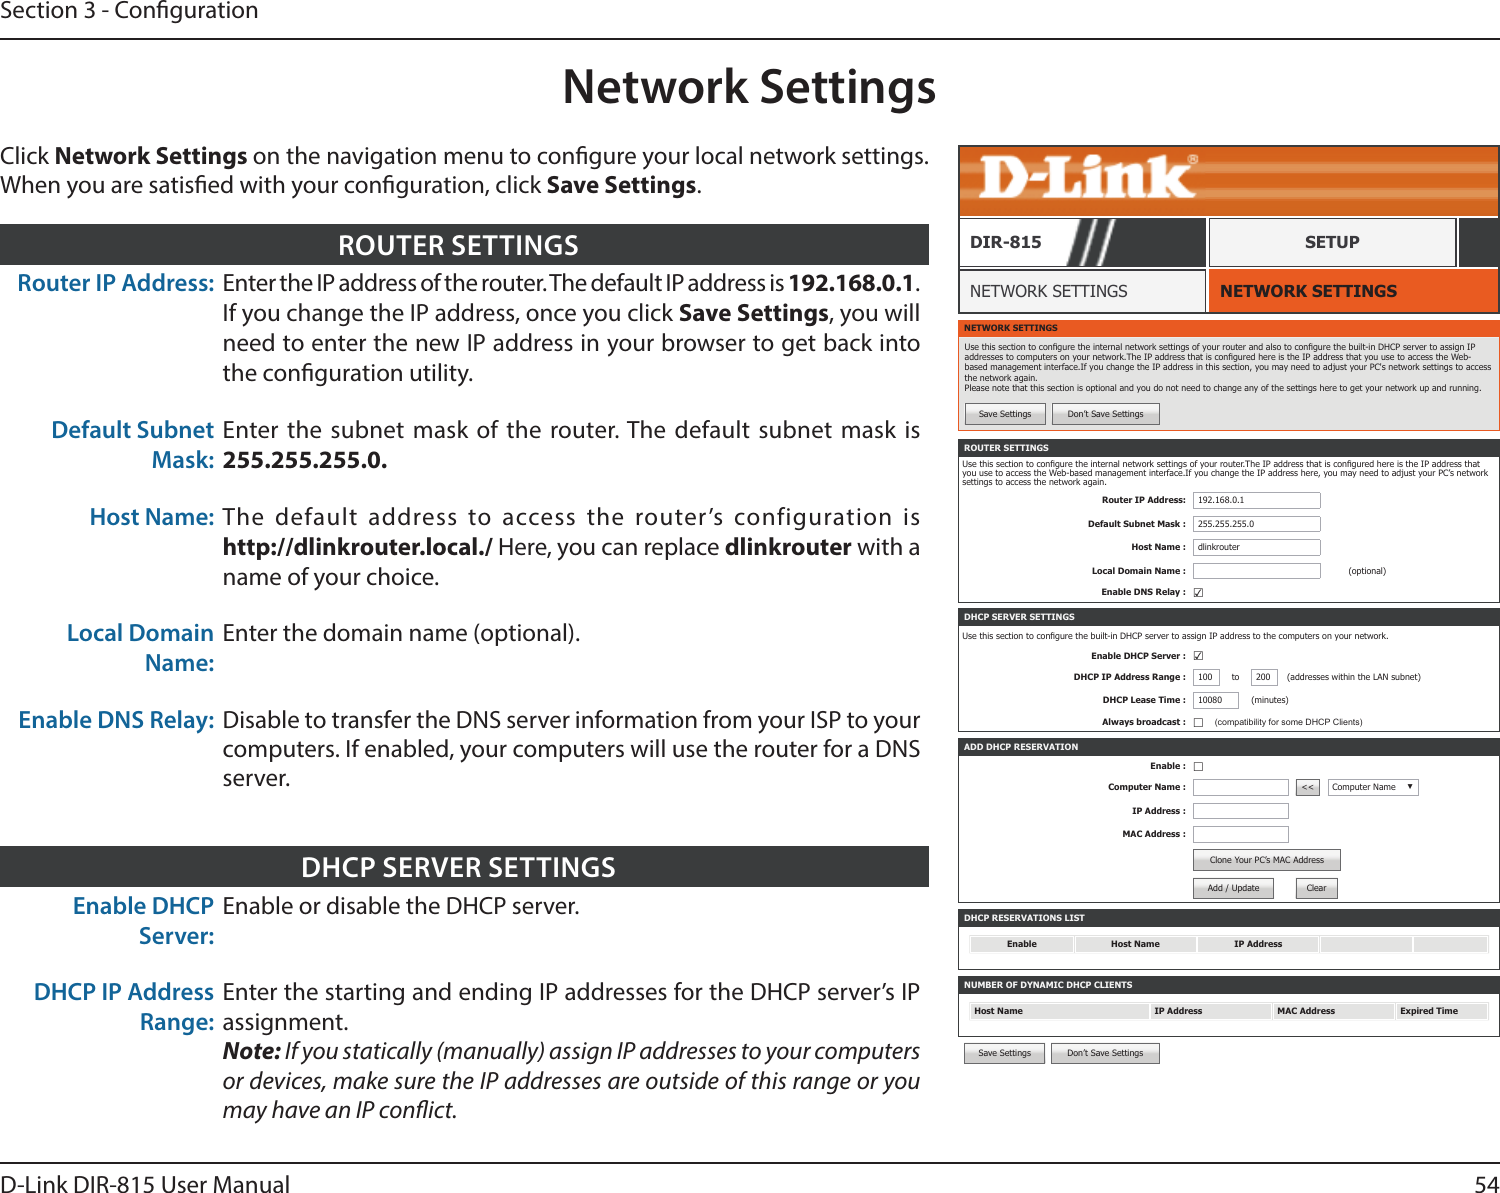 54D-Link DIR-815 User ManualSection 3 - CongurationNetwork SettingsNETWORK SETTINGSNETWORK SETTINGSDIR-815 SETUPClick Network Settings on the navigation menu to congure your local network settings. When you are satised with your conguration, click Save Settings.Router IP Address: Enter the IP address of the router. The default IP address is 192.168.0.1. If you change the IP address, once you click Save Settings, you will need to enter the new IP address in your browser to get back into the conguration utility.Default Subnet Mask:Enter the subnet mask of the router. The default subnet mask is 255.255.255.0.Host Name: The default address to access the router’s configuration is  http://dlinkrouter.local./ Here, you can replace dlinkrouter with a name of your choice.Local Domain Name:Enter the domain name (optional).Enable DNS Relay: Disable to transfer the DNS server information from your ISP to your computers. If enabled, your computers will use the router for a DNS server.ROUTER SETTINGSNETWORK SETTINGSUse this section to congure the internal network settings of your router and also to congure the built-in DHCP server to assign IP addresses to computers on your network.The IP address that is congured here is the IP address that you use to access the Web-based management interface.If you change the IP address in this section, you may need to adjust your PC&apos;s network settings to access the network again. Please note that this section is optional and you do not need to change any of the settings here to get your network up and running.Save Settings Don’t Save SettingsDHCP RESERVATIONS LISTEnable Host Name IP AddressNUMBER OF DYNAMIC DHCP CLIENTSHost Name IP Address MAC Address Expired TimeROUTER SETTINGSUse this section to congure the internal network settings of your router.The IP address that is congured here is the IP address that you use to access the Web-based management interface.If you change the IP address here, you may need to adjust your PC’s network settings to access the network again.Router IP Address: 192.168.0.1Default Subnet Mask : 255.255.255.0Host Name : dlinkrouterLocal Domain Name : (optional)Enable DNS Relay : ☑ADD DHCP RESERVATIONEnable : ☐Computer Name : &lt;&lt; Computer Name ▼IP Address :MAC Address :Clone Your PC’s MAC AddressAdd / Update ClearDHCP SERVER SETTINGSUse this section to congure the built-in DHCP server to assign IP address to the computers on your network.Enable DHCP Server : ☑DHCP IP Address Range : 100 to 200 (addresses within the LAN subnet)DHCP Lease Time : 10080 (minutes)Always broadcast : ☐(compatibility for some DHCP Clients)Save Settings Don’t Save SettingsEnable DHCP Server:Enable or disable the DHCP server.DHCP IP Address Range:Enter the starting and ending IP addresses for the DHCP server’s IP assignment.Note: If you statically (manually) assign IP addresses to your computers or devices, make sure the IP addresses are outside of this range or you may have an IP conict.DHCP SERVER SETTINGS